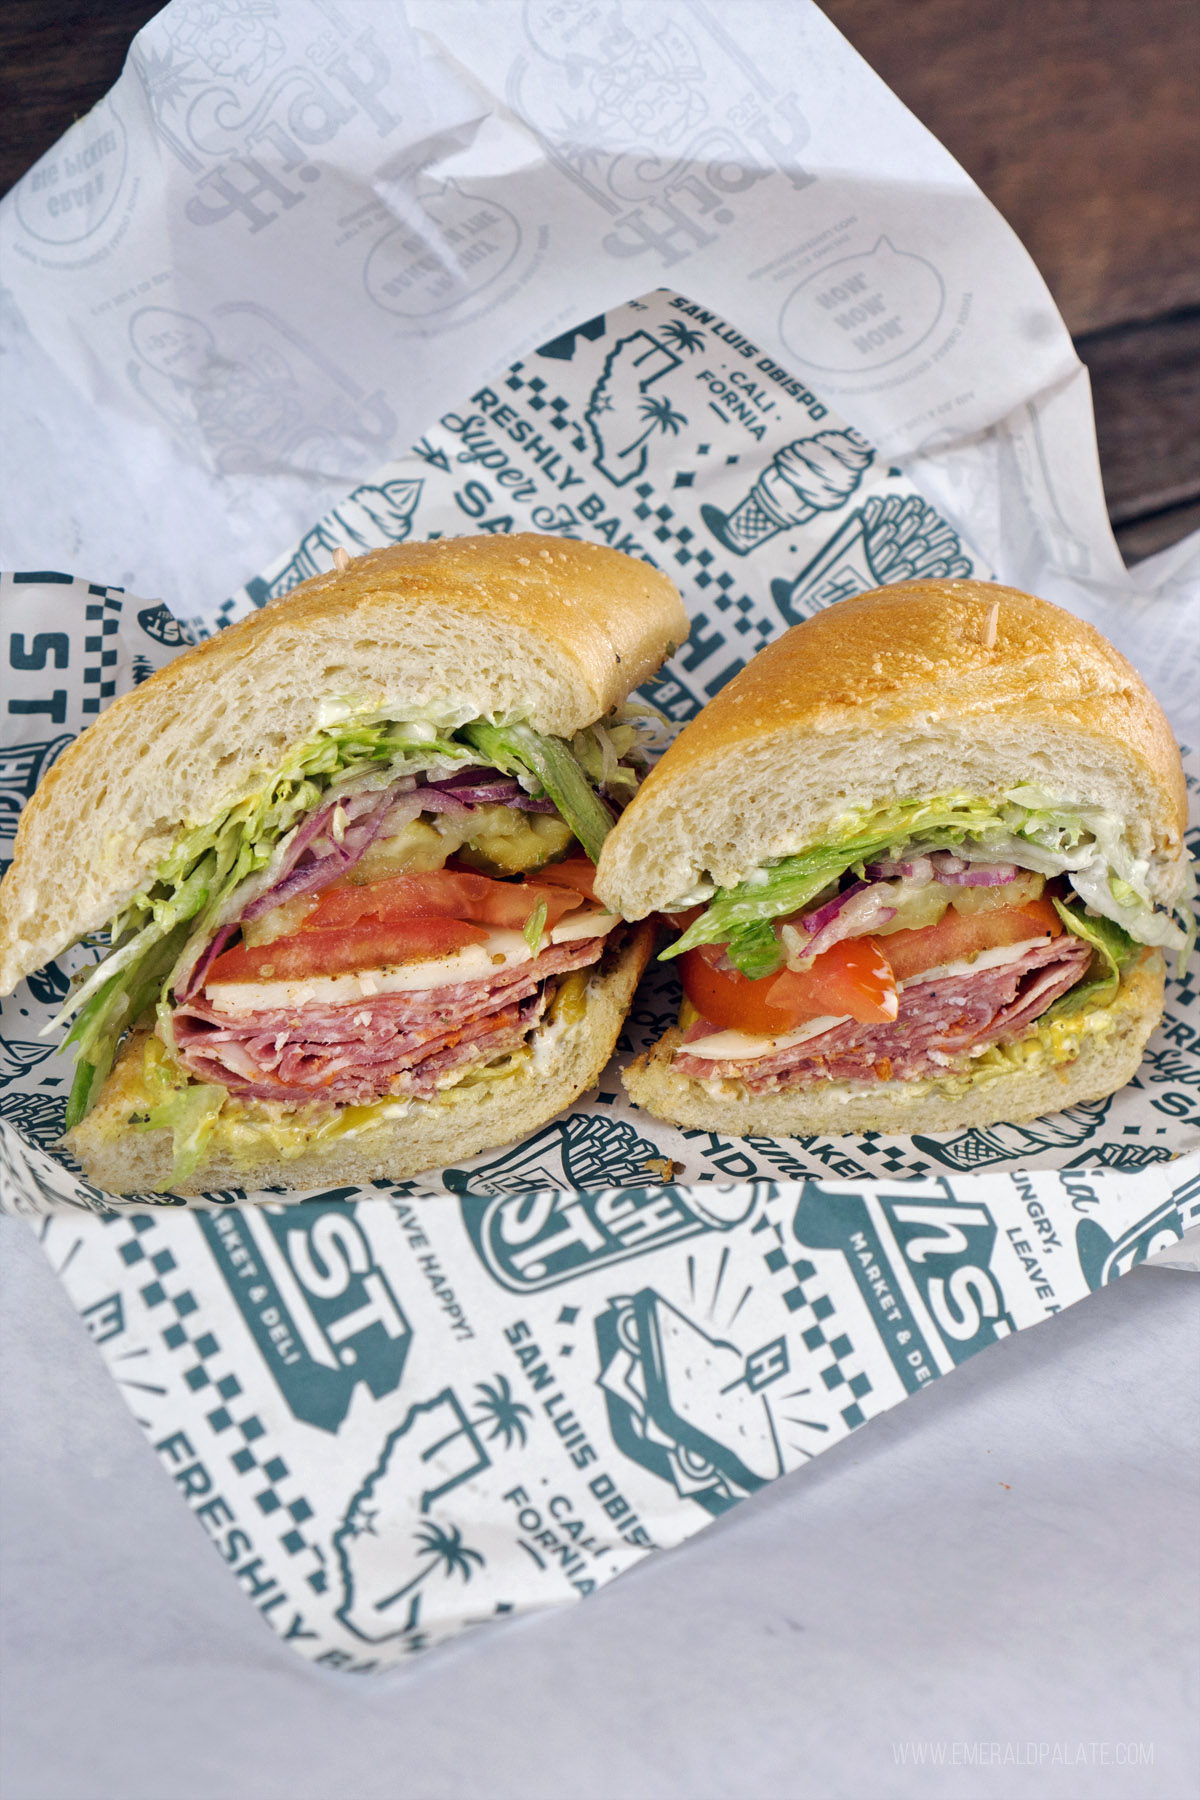 sliced Italian sub from a place to eat in San Luis Obispo